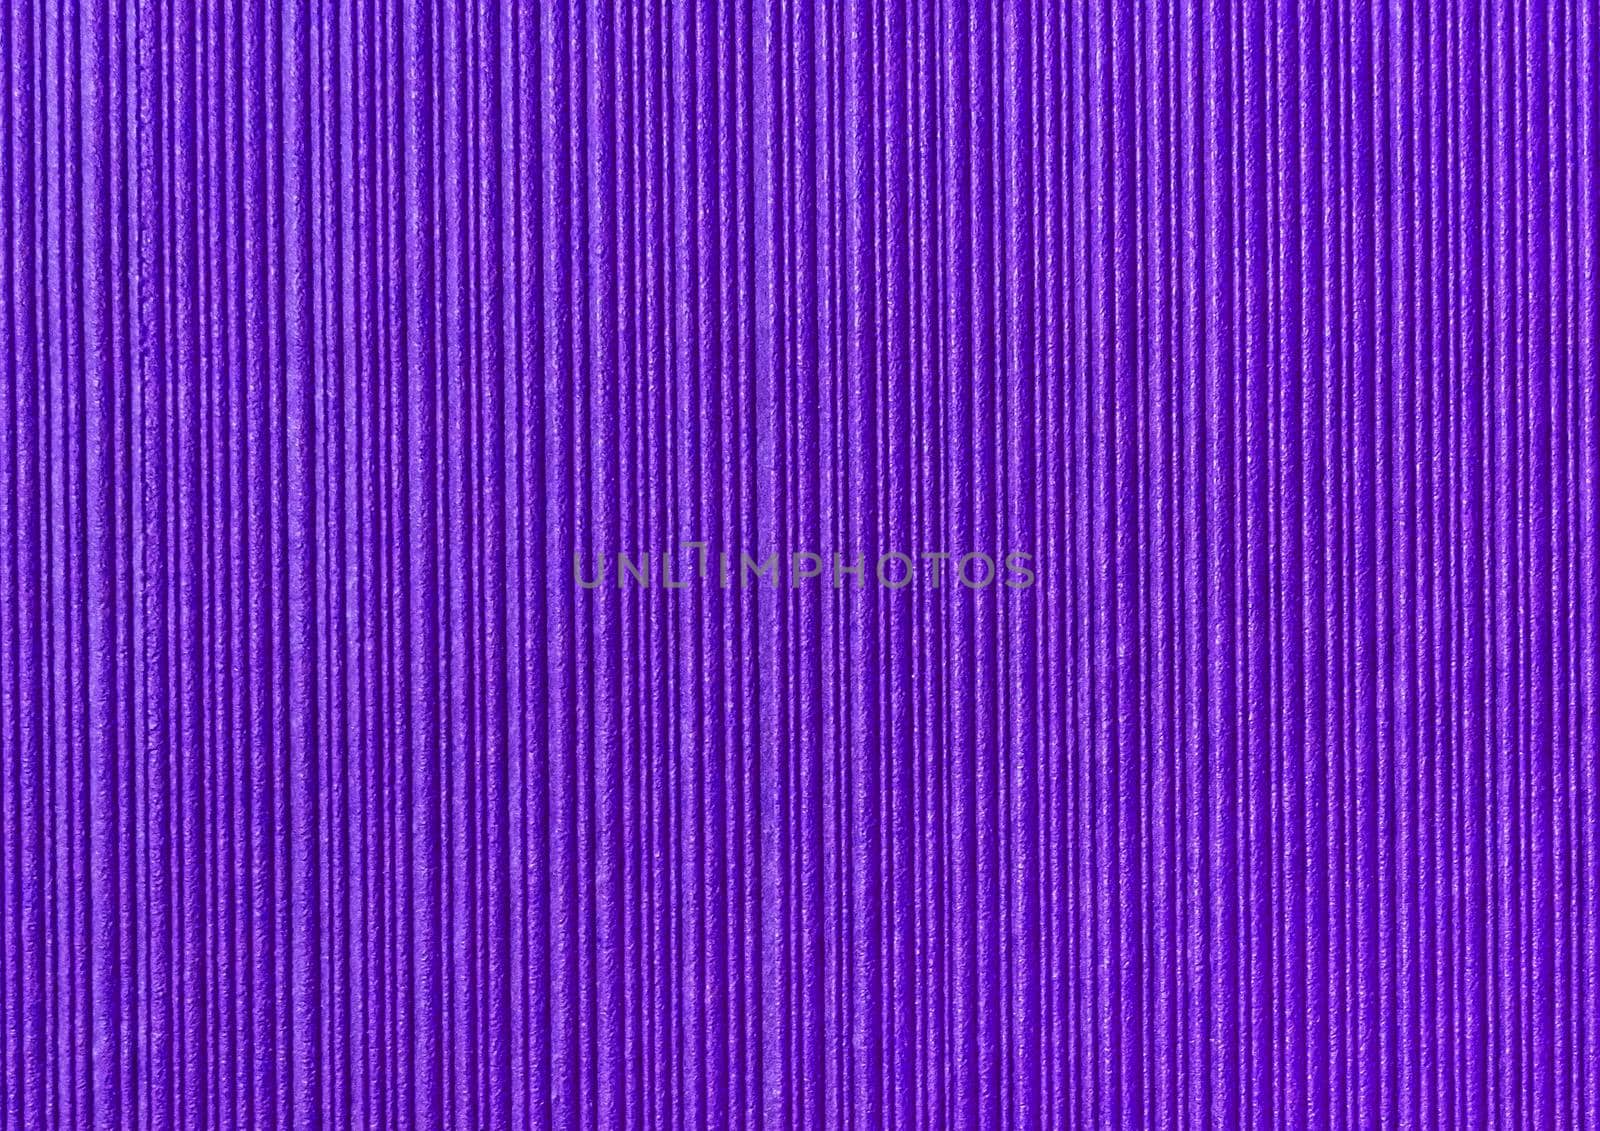 Purple abstract striped pattern wallpaper background, violet paper texture with vertical lines.